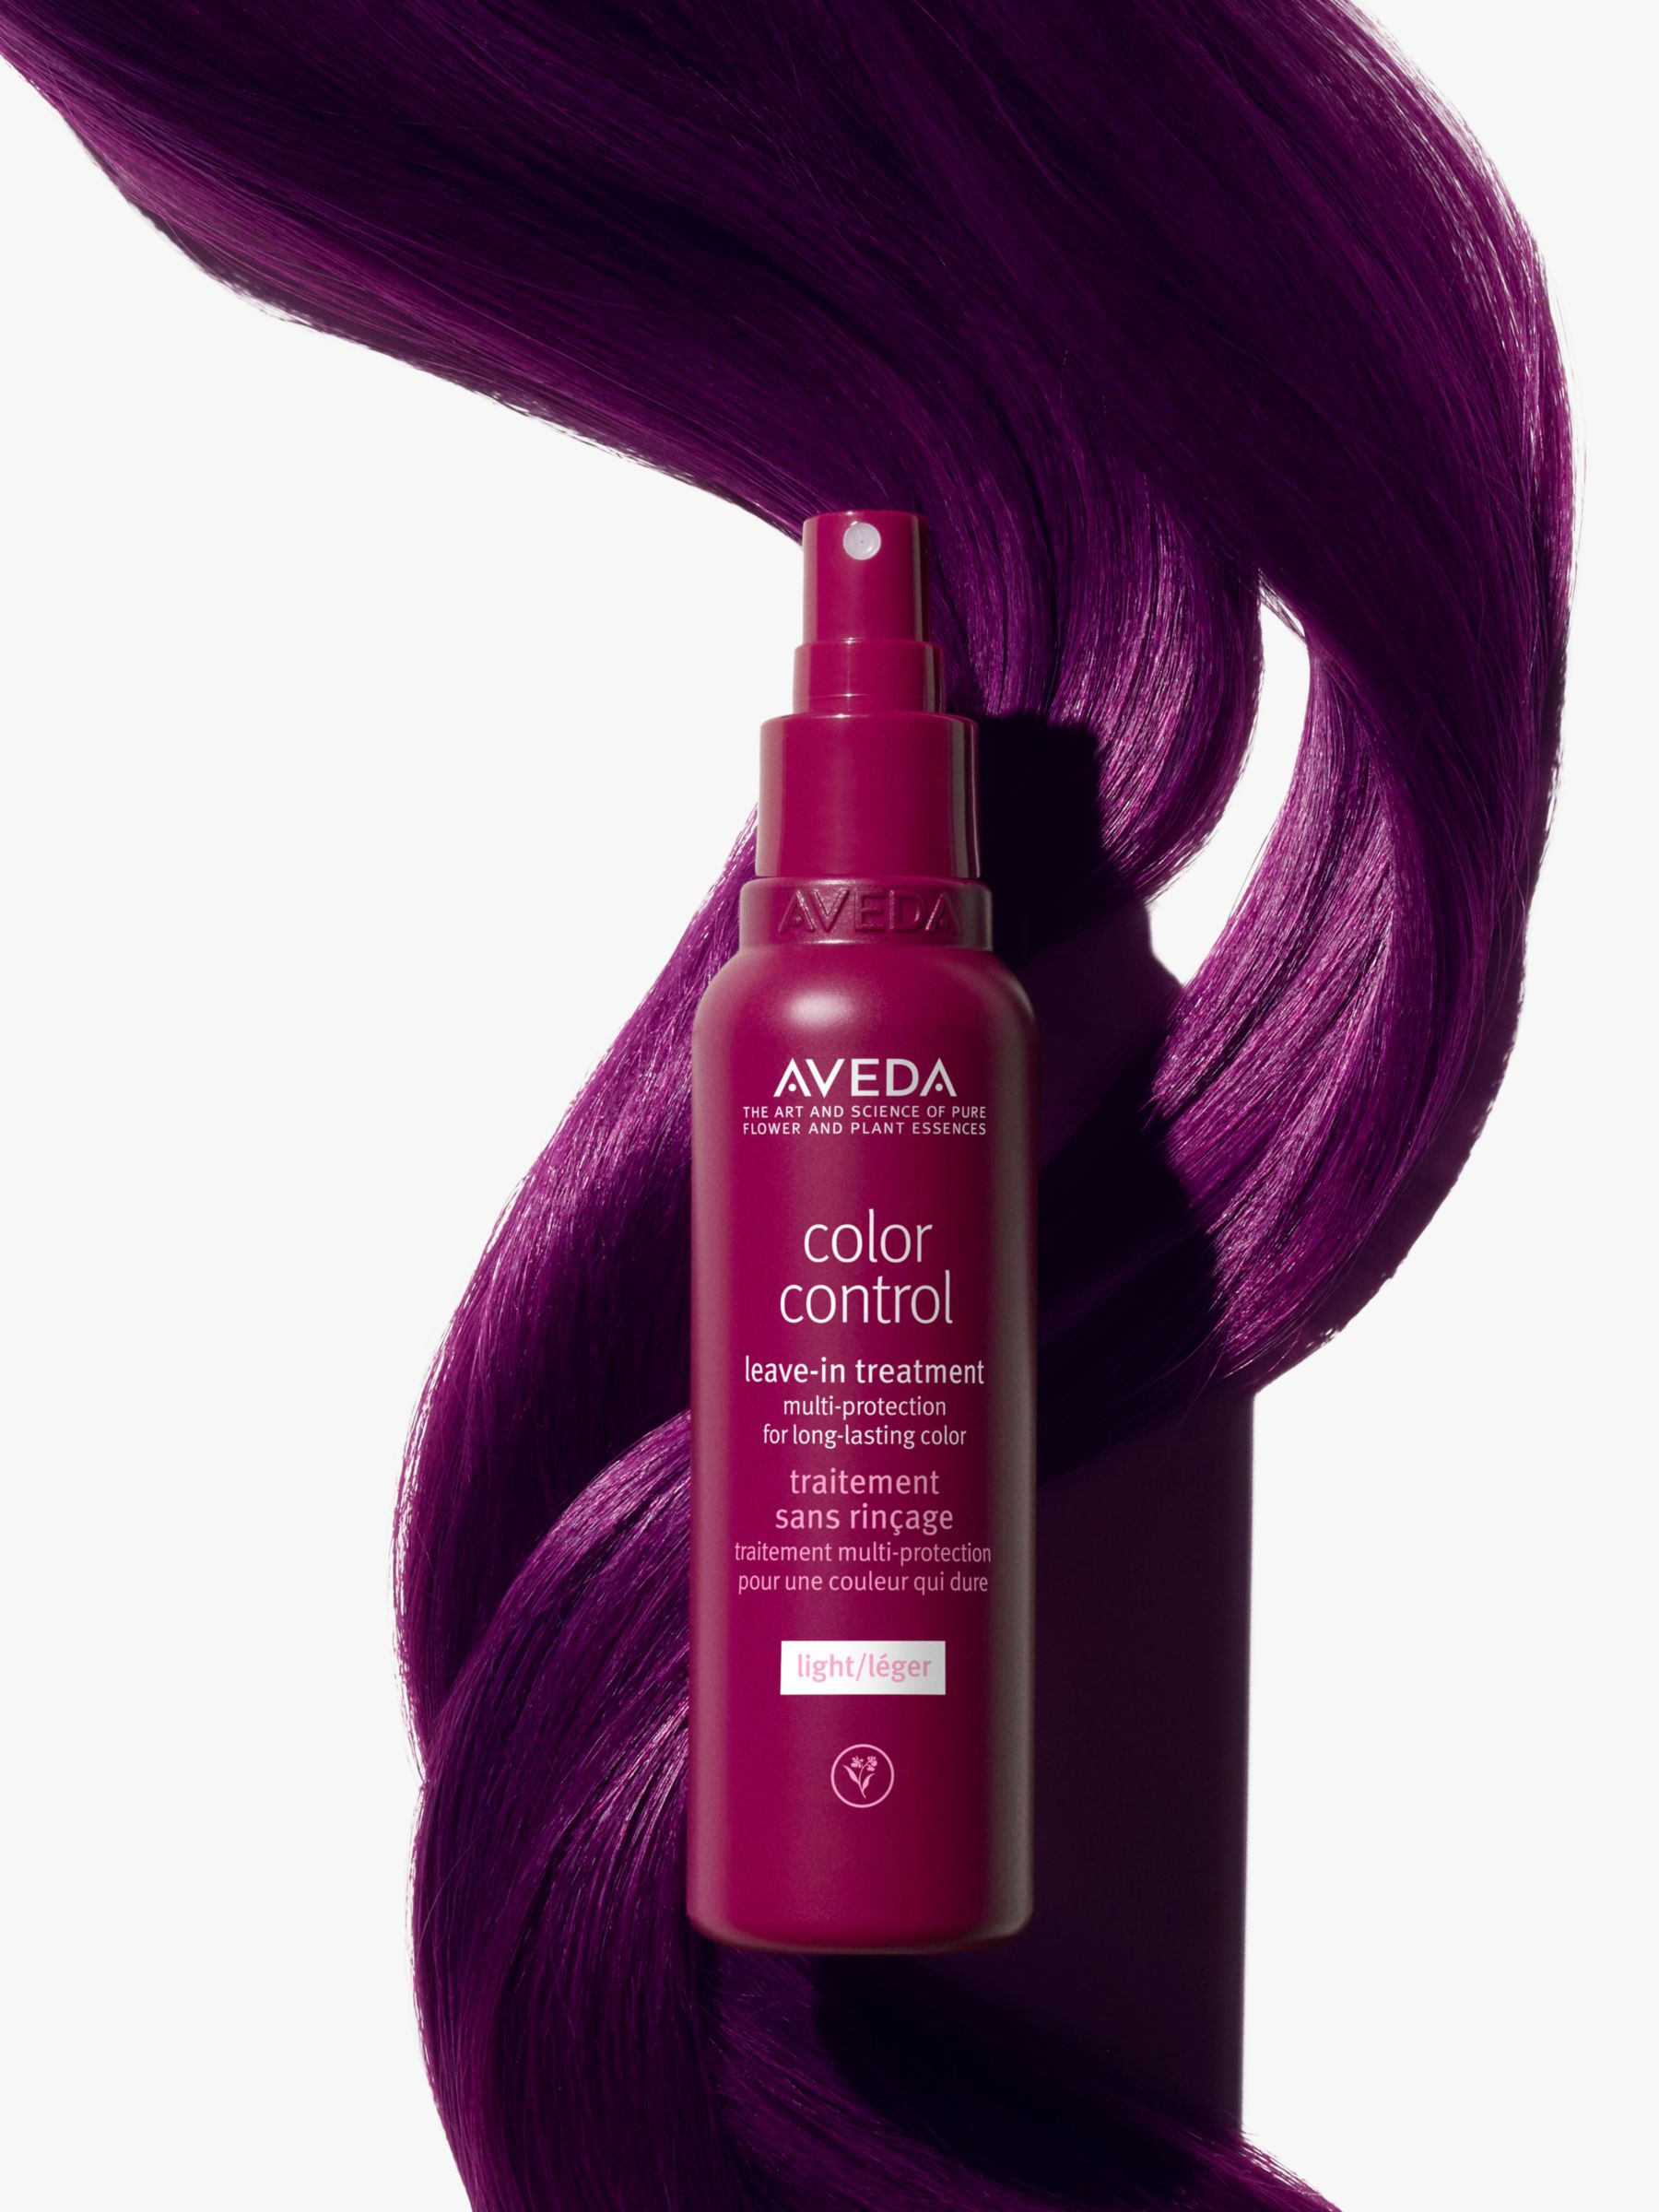 Aveda Colour Control Leave-In Treatment, Light, 150ml 2